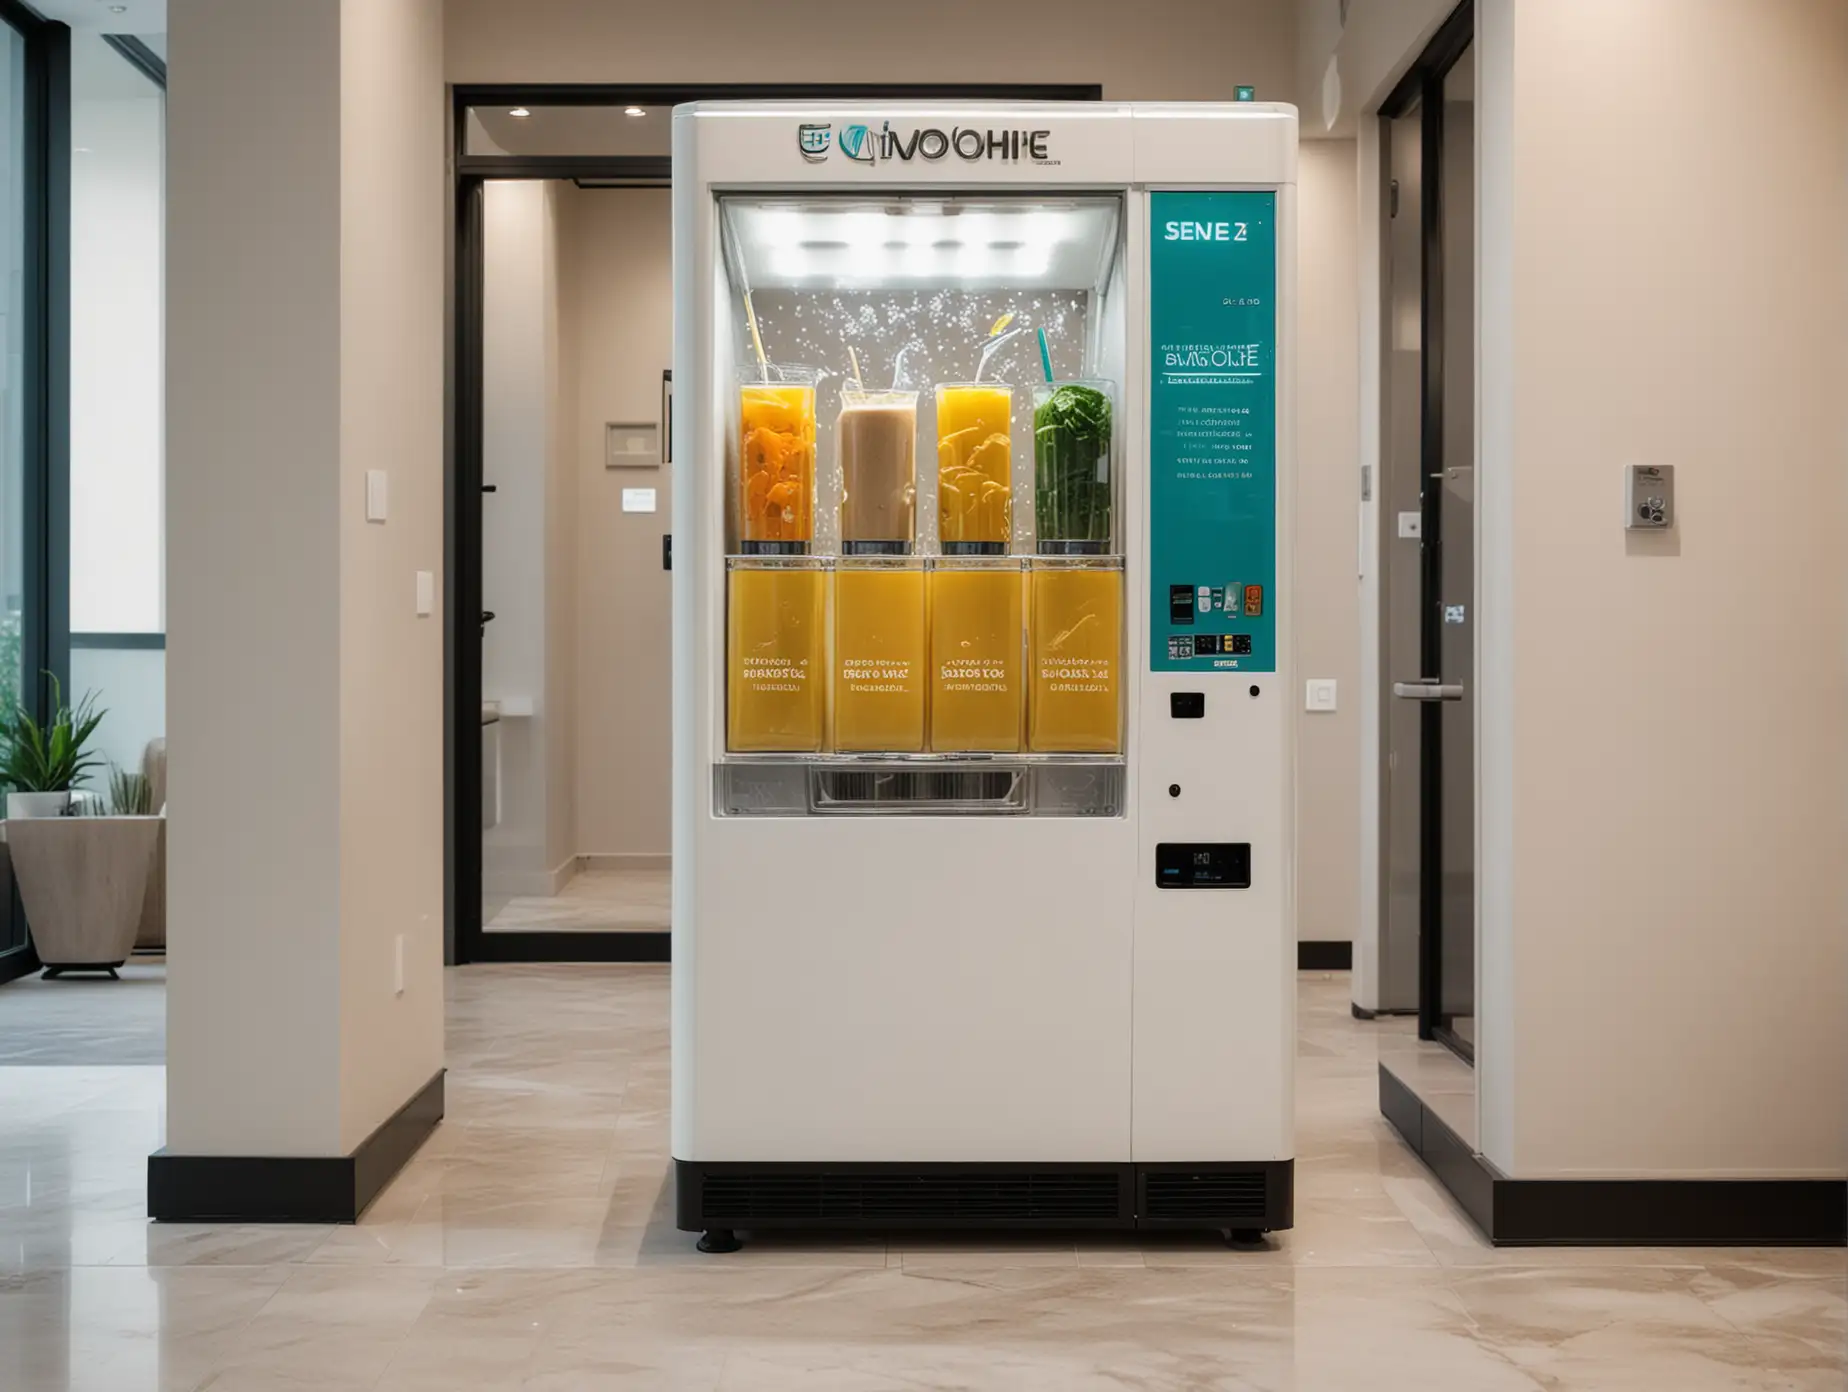 A smoothie making vending machine, white, teal and dark yellow, in a glass wall hallway at a luxury condo lobby 